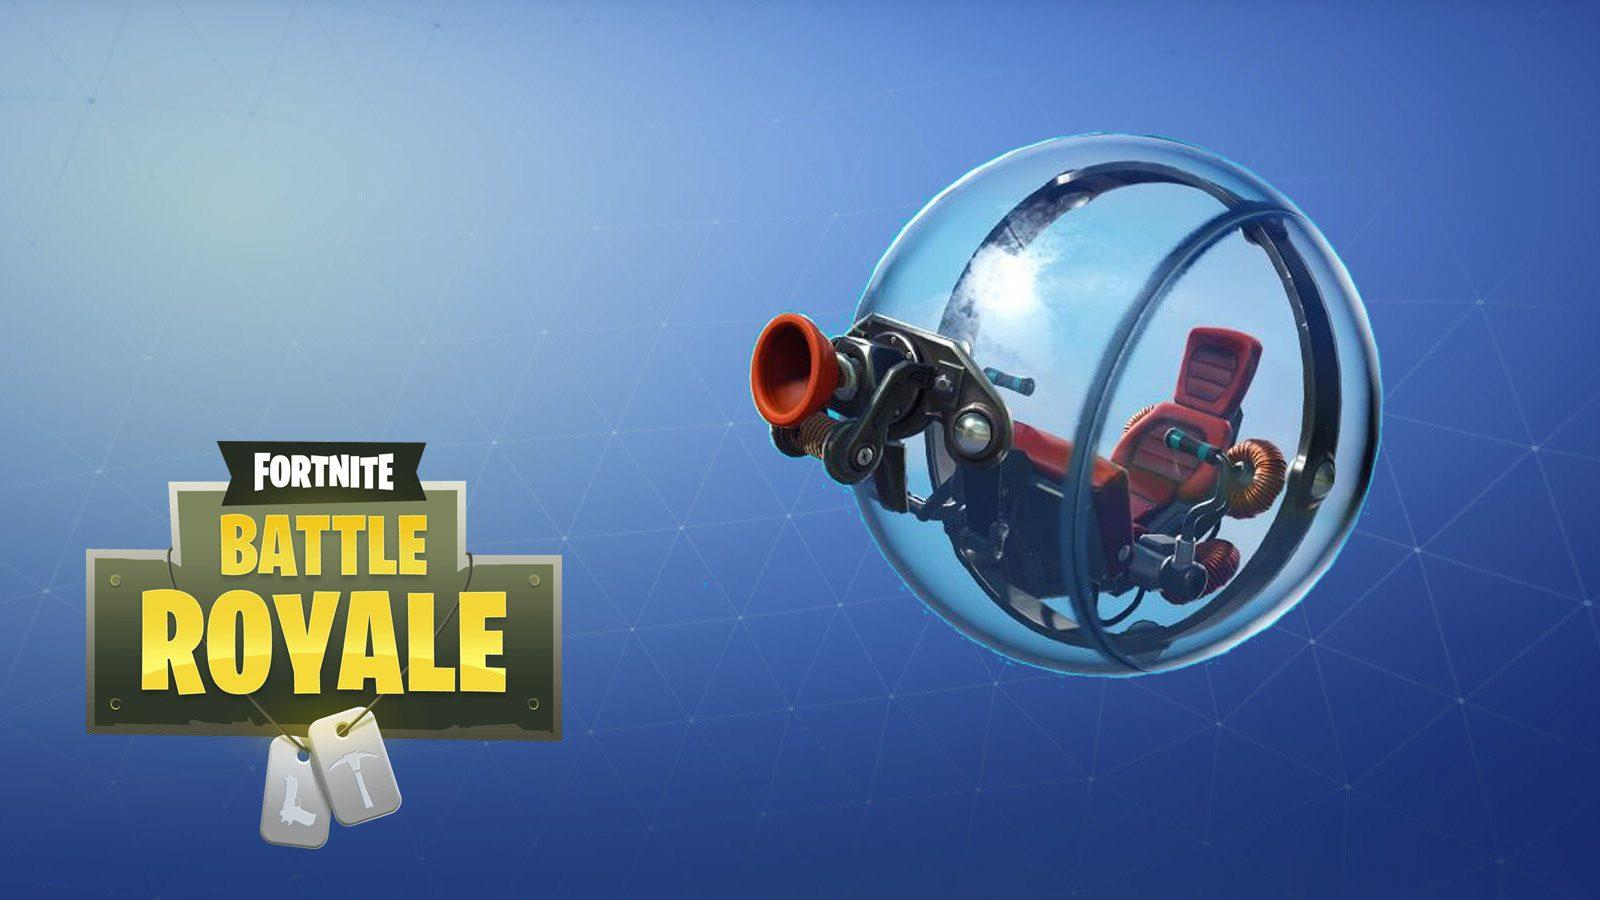 Where to find Fortnite Baller vehicles